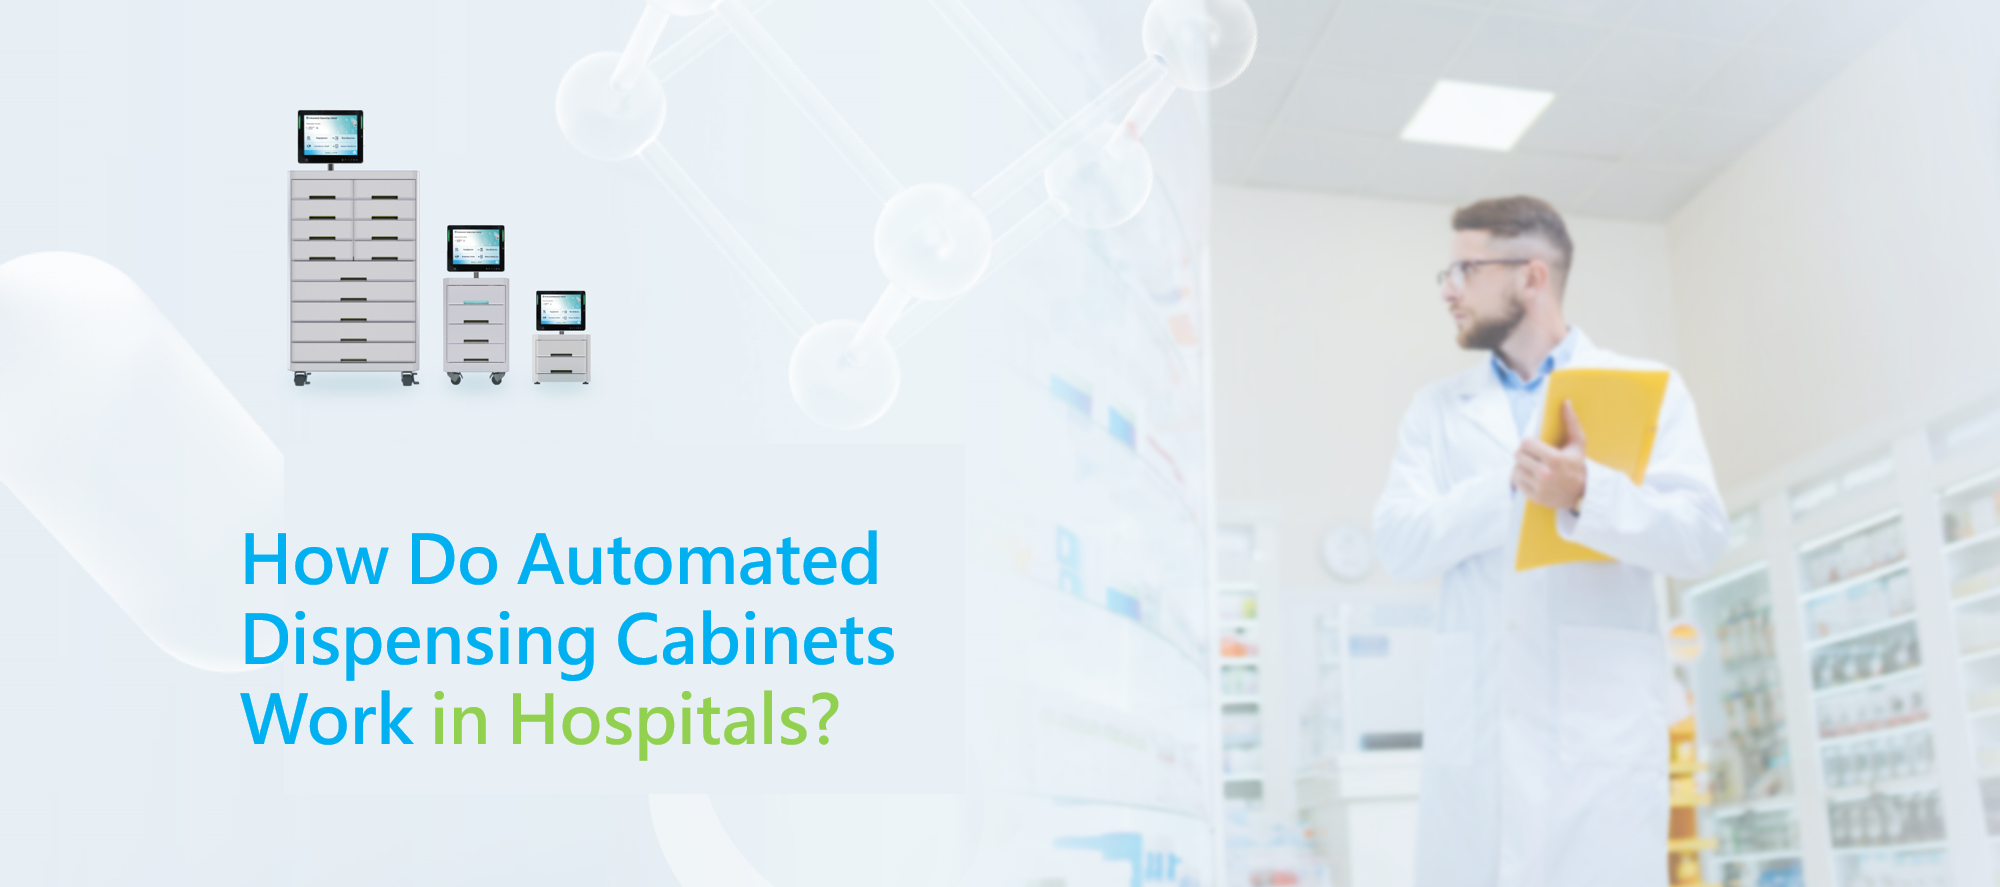 How Do Automated Dispensing Cabinets Work in Hospitals